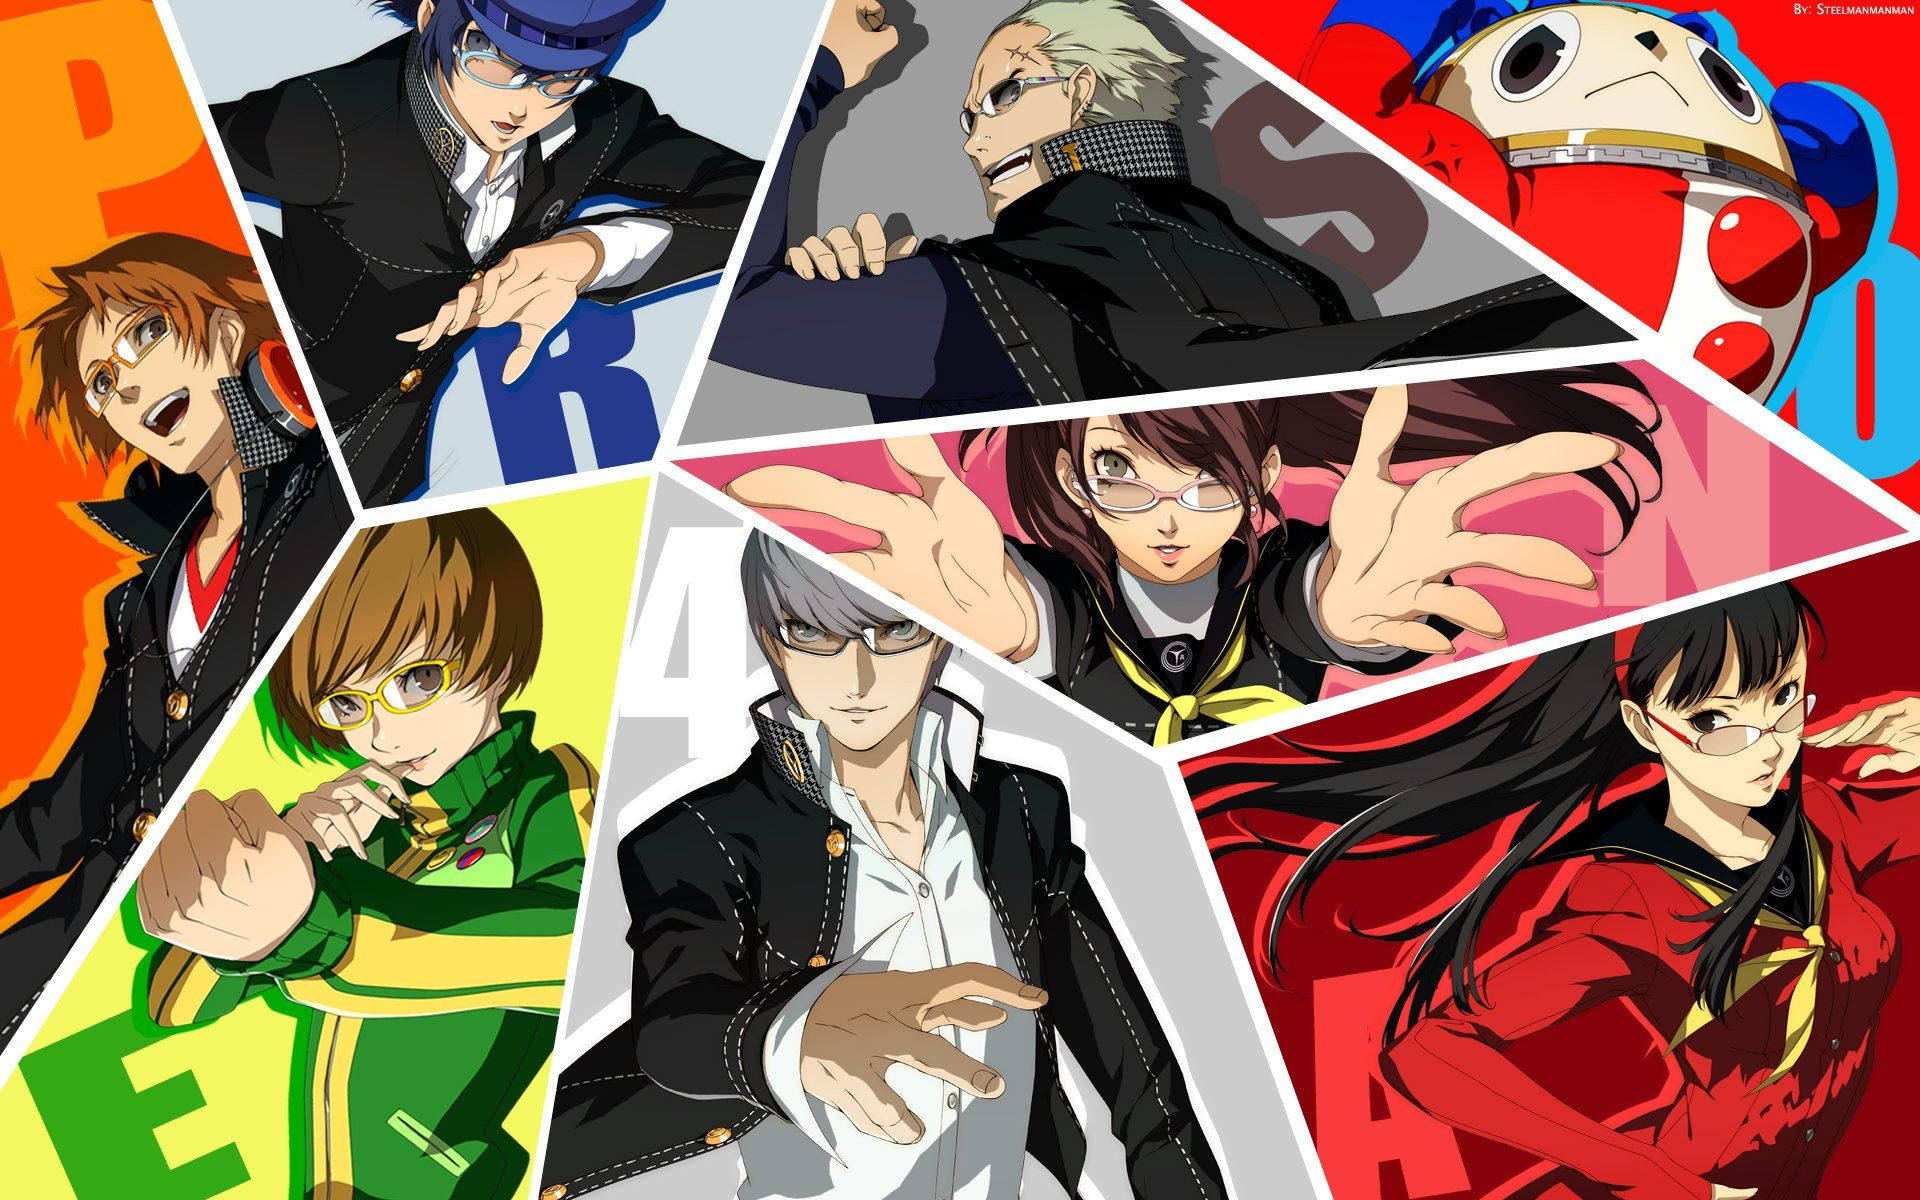 A Close Look At The Characters Of Persona 4 Wallpaper